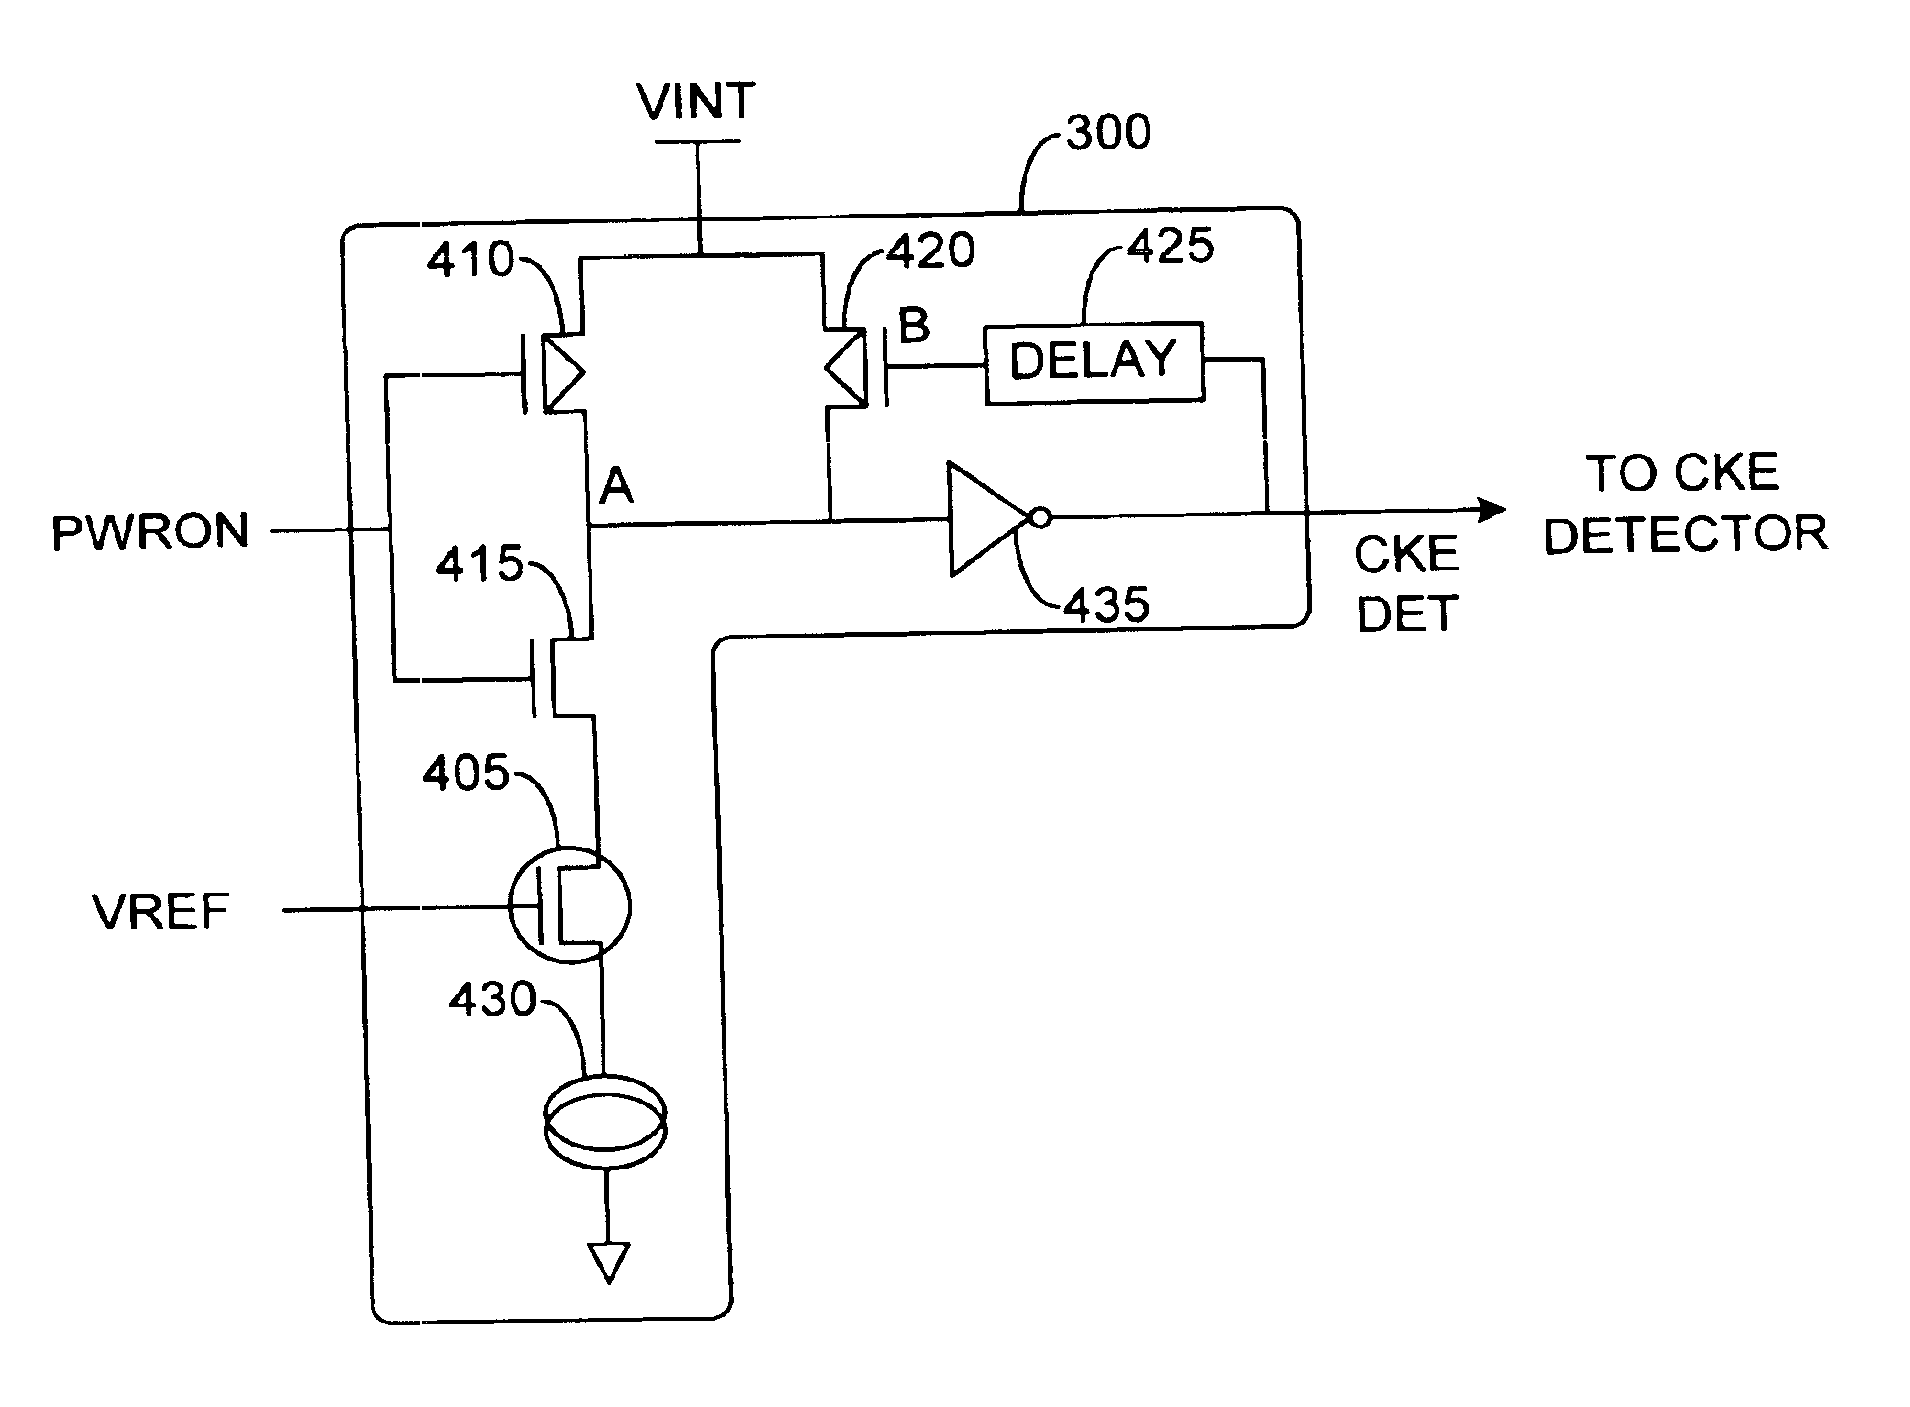 Reference voltage detector for power-on sequence in a memory